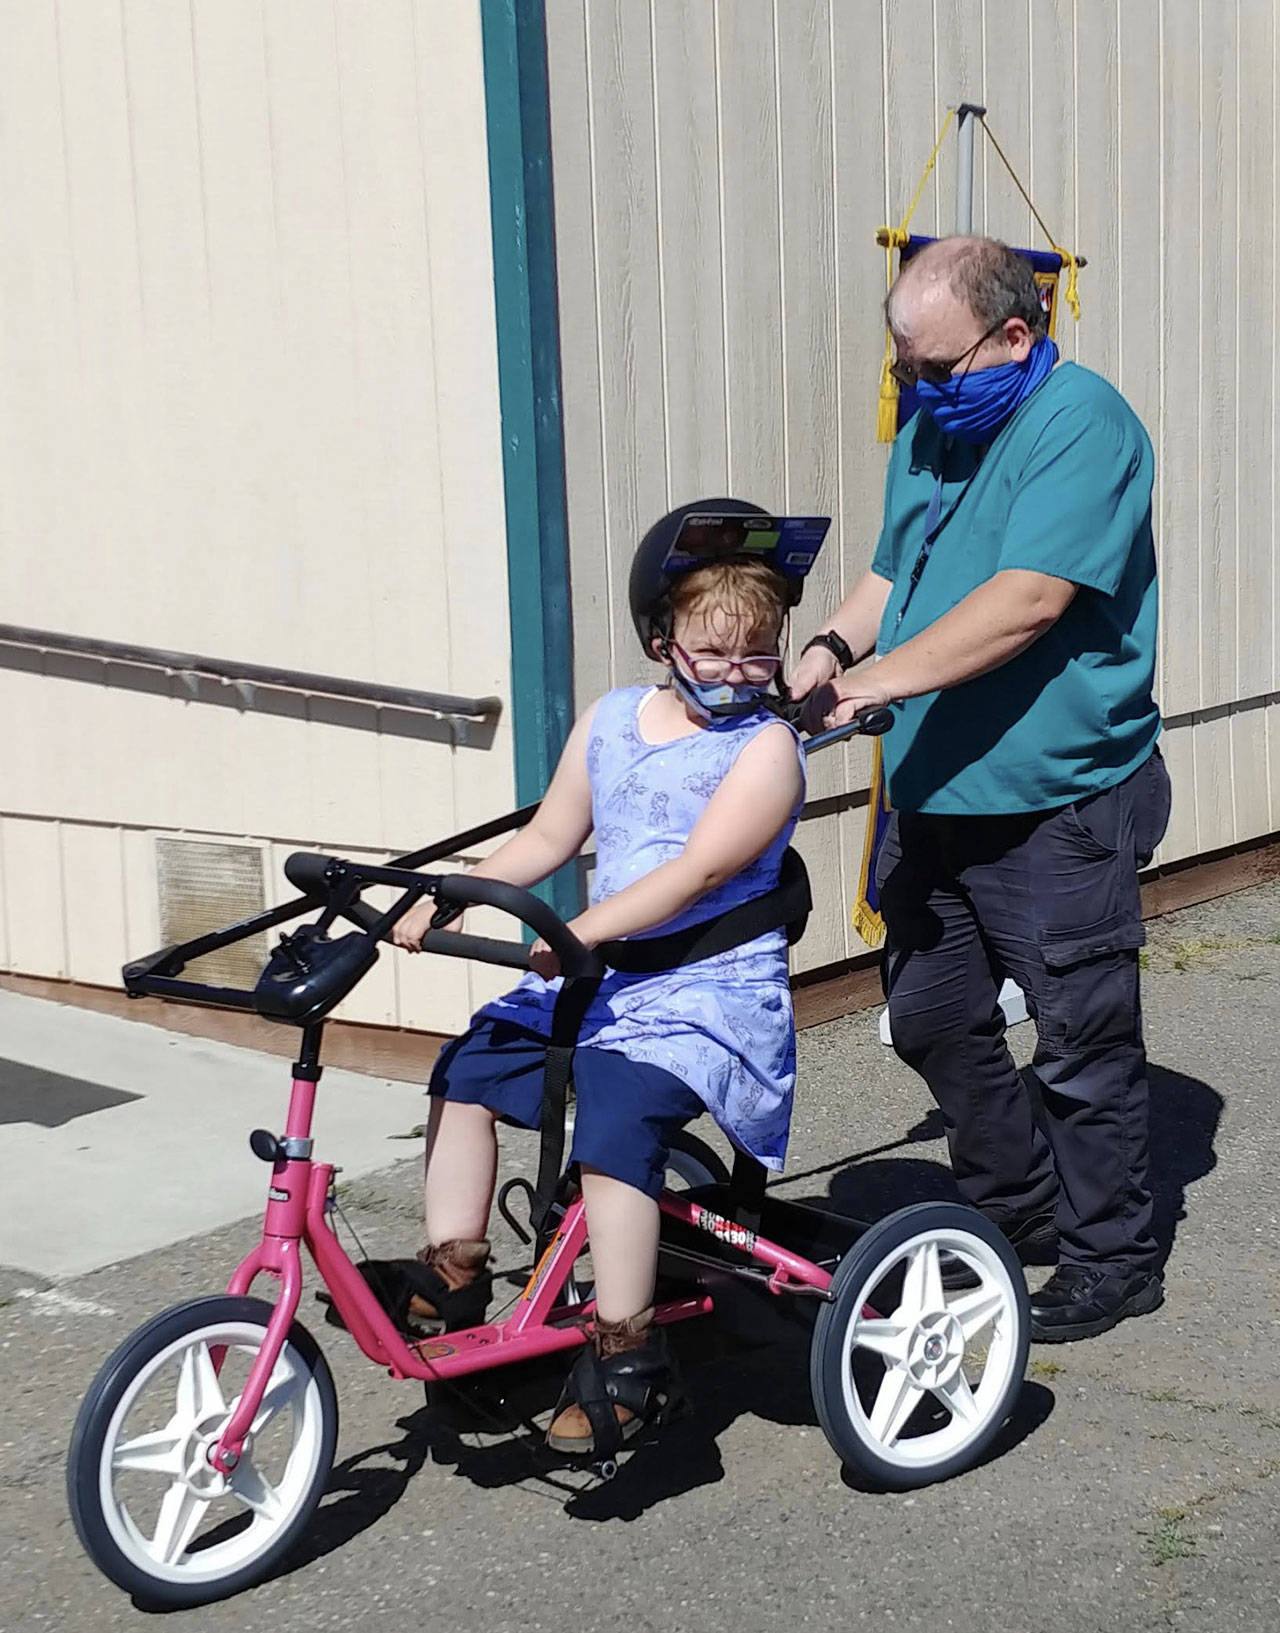 A Sequim students enjoys a ride on a newly-donated adaptive bicycle, donated by Rotary Club of Sequim. Submitted photo